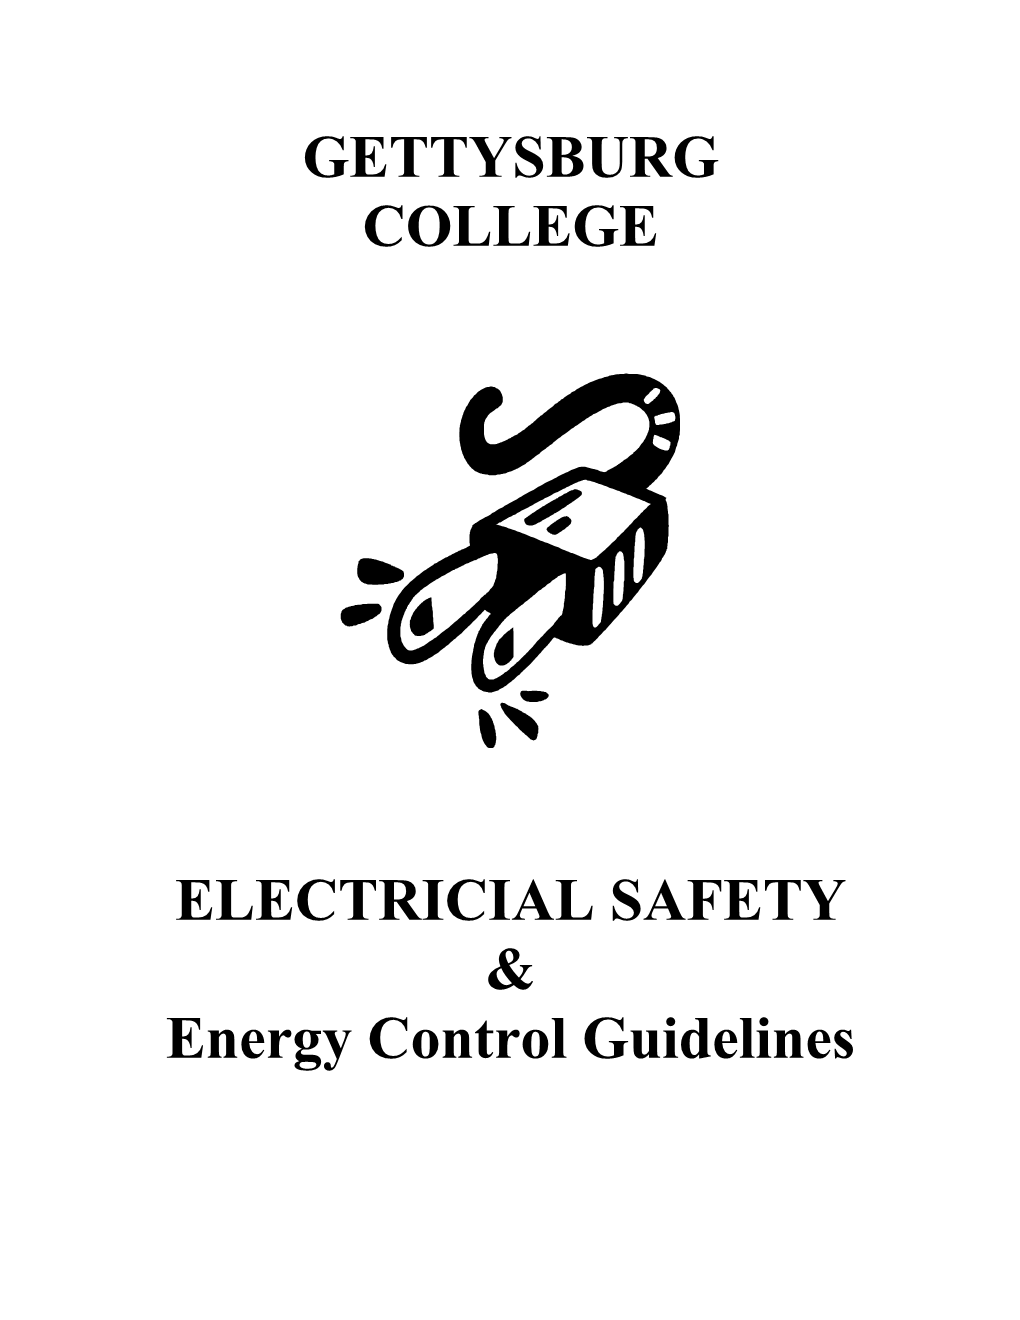 Electricial Safety